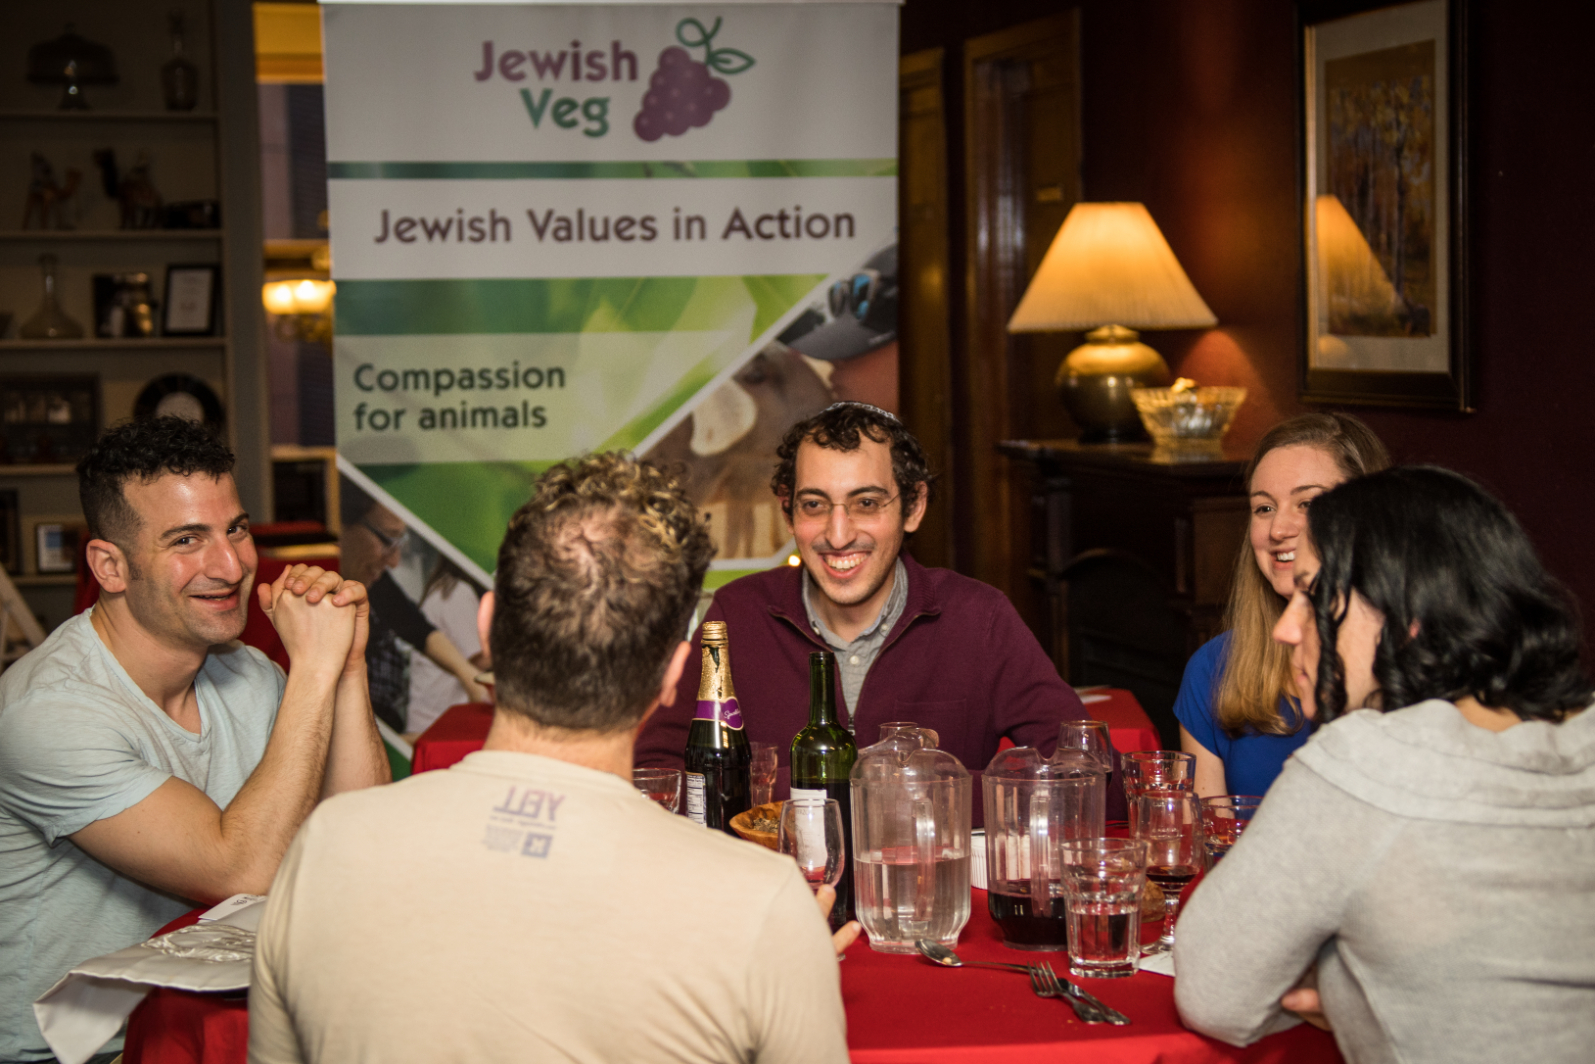 A group of young adults sitting at a red clothed table with food and wine, a banner for Jewish Veg hanging in the background.